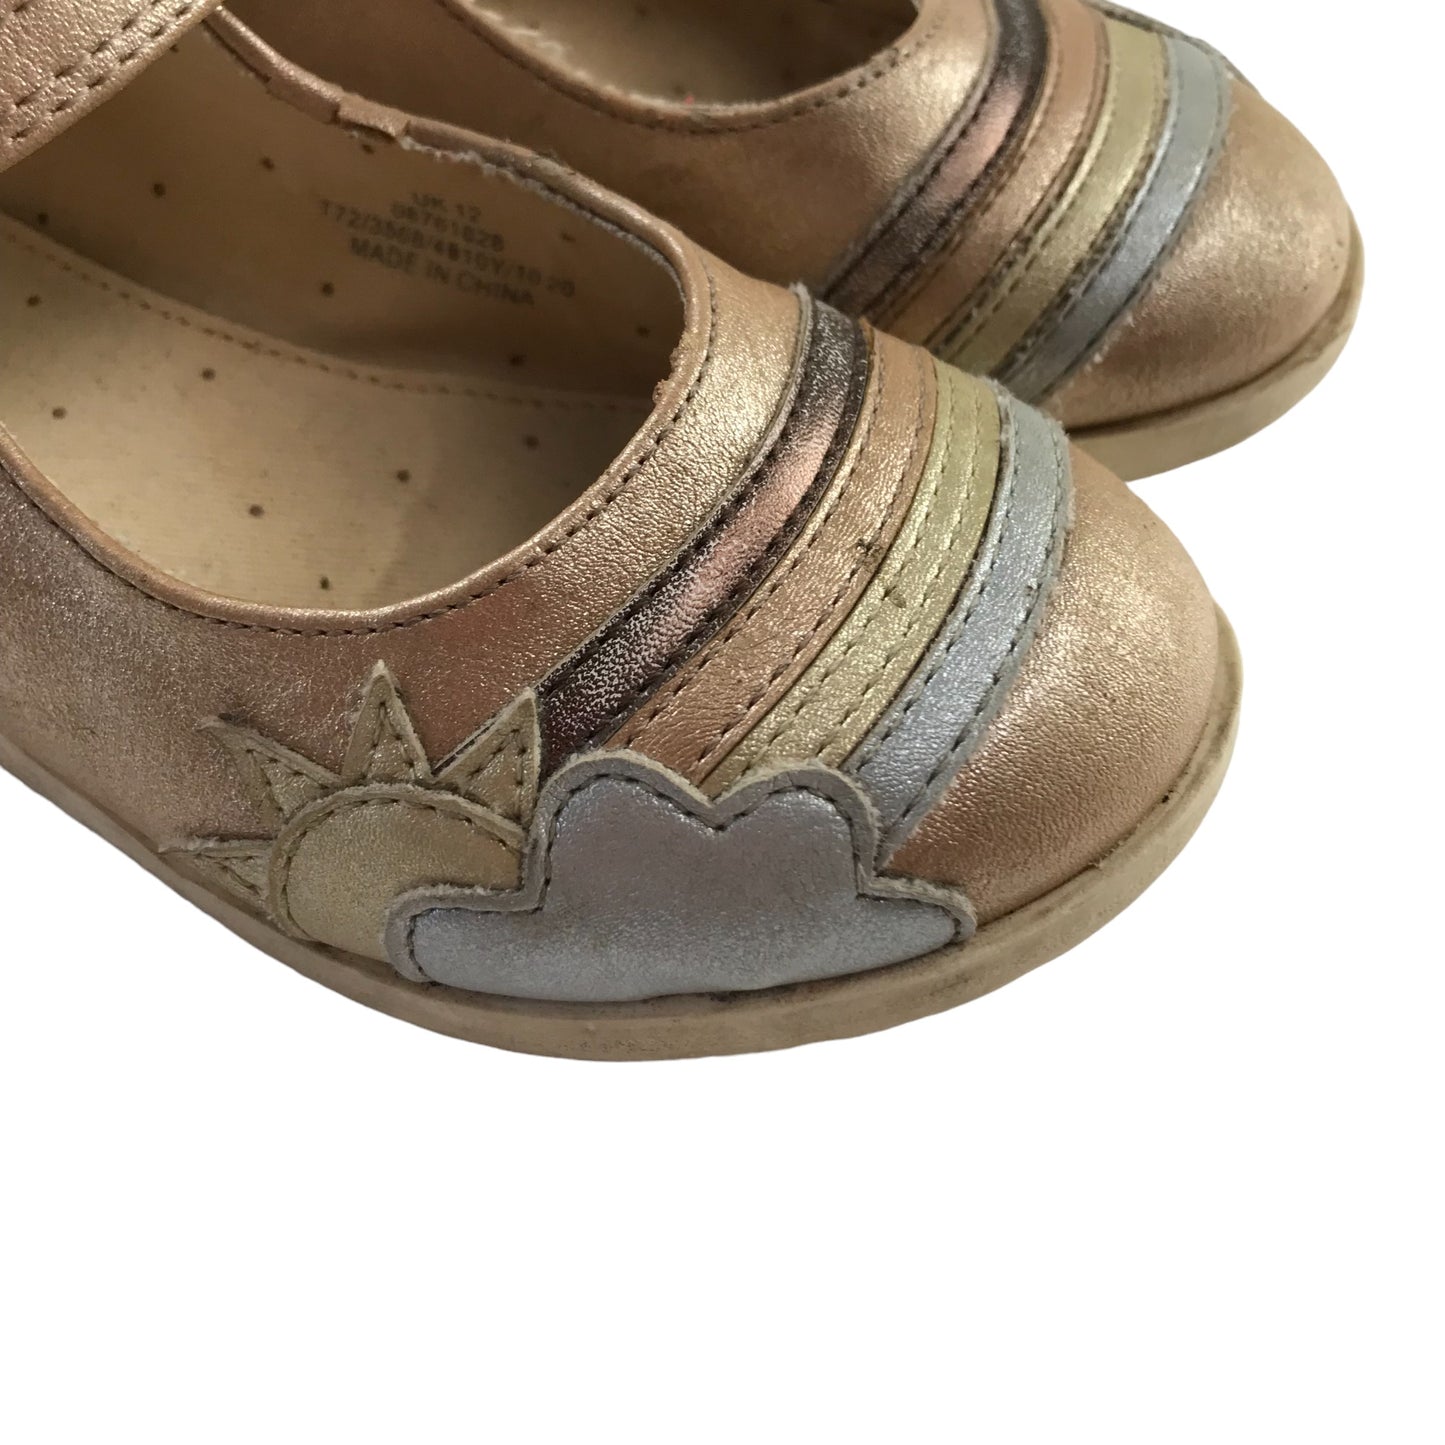 M&S Pumps Shoe Size 12 Junior Gold with Rainbow Clouds and Sun